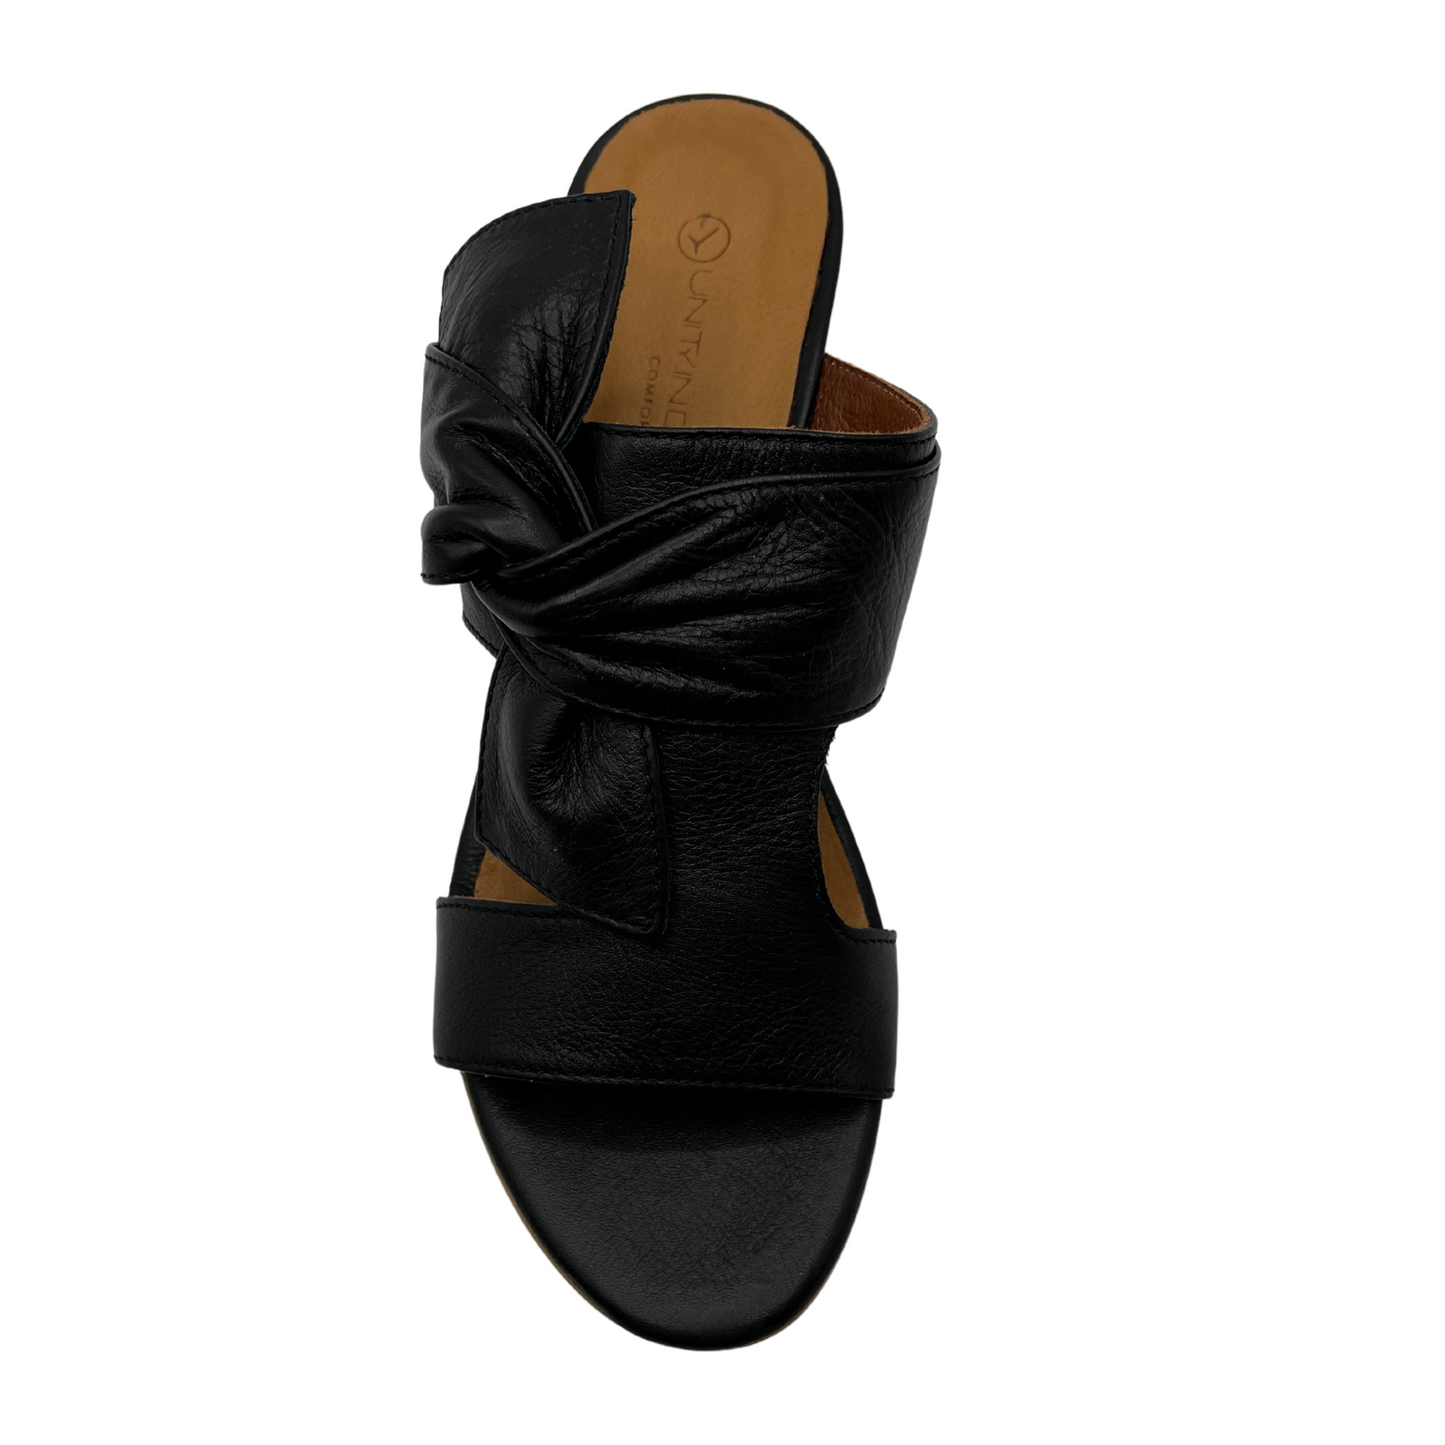 Top view of black leather sandal with block heel and knot detail.